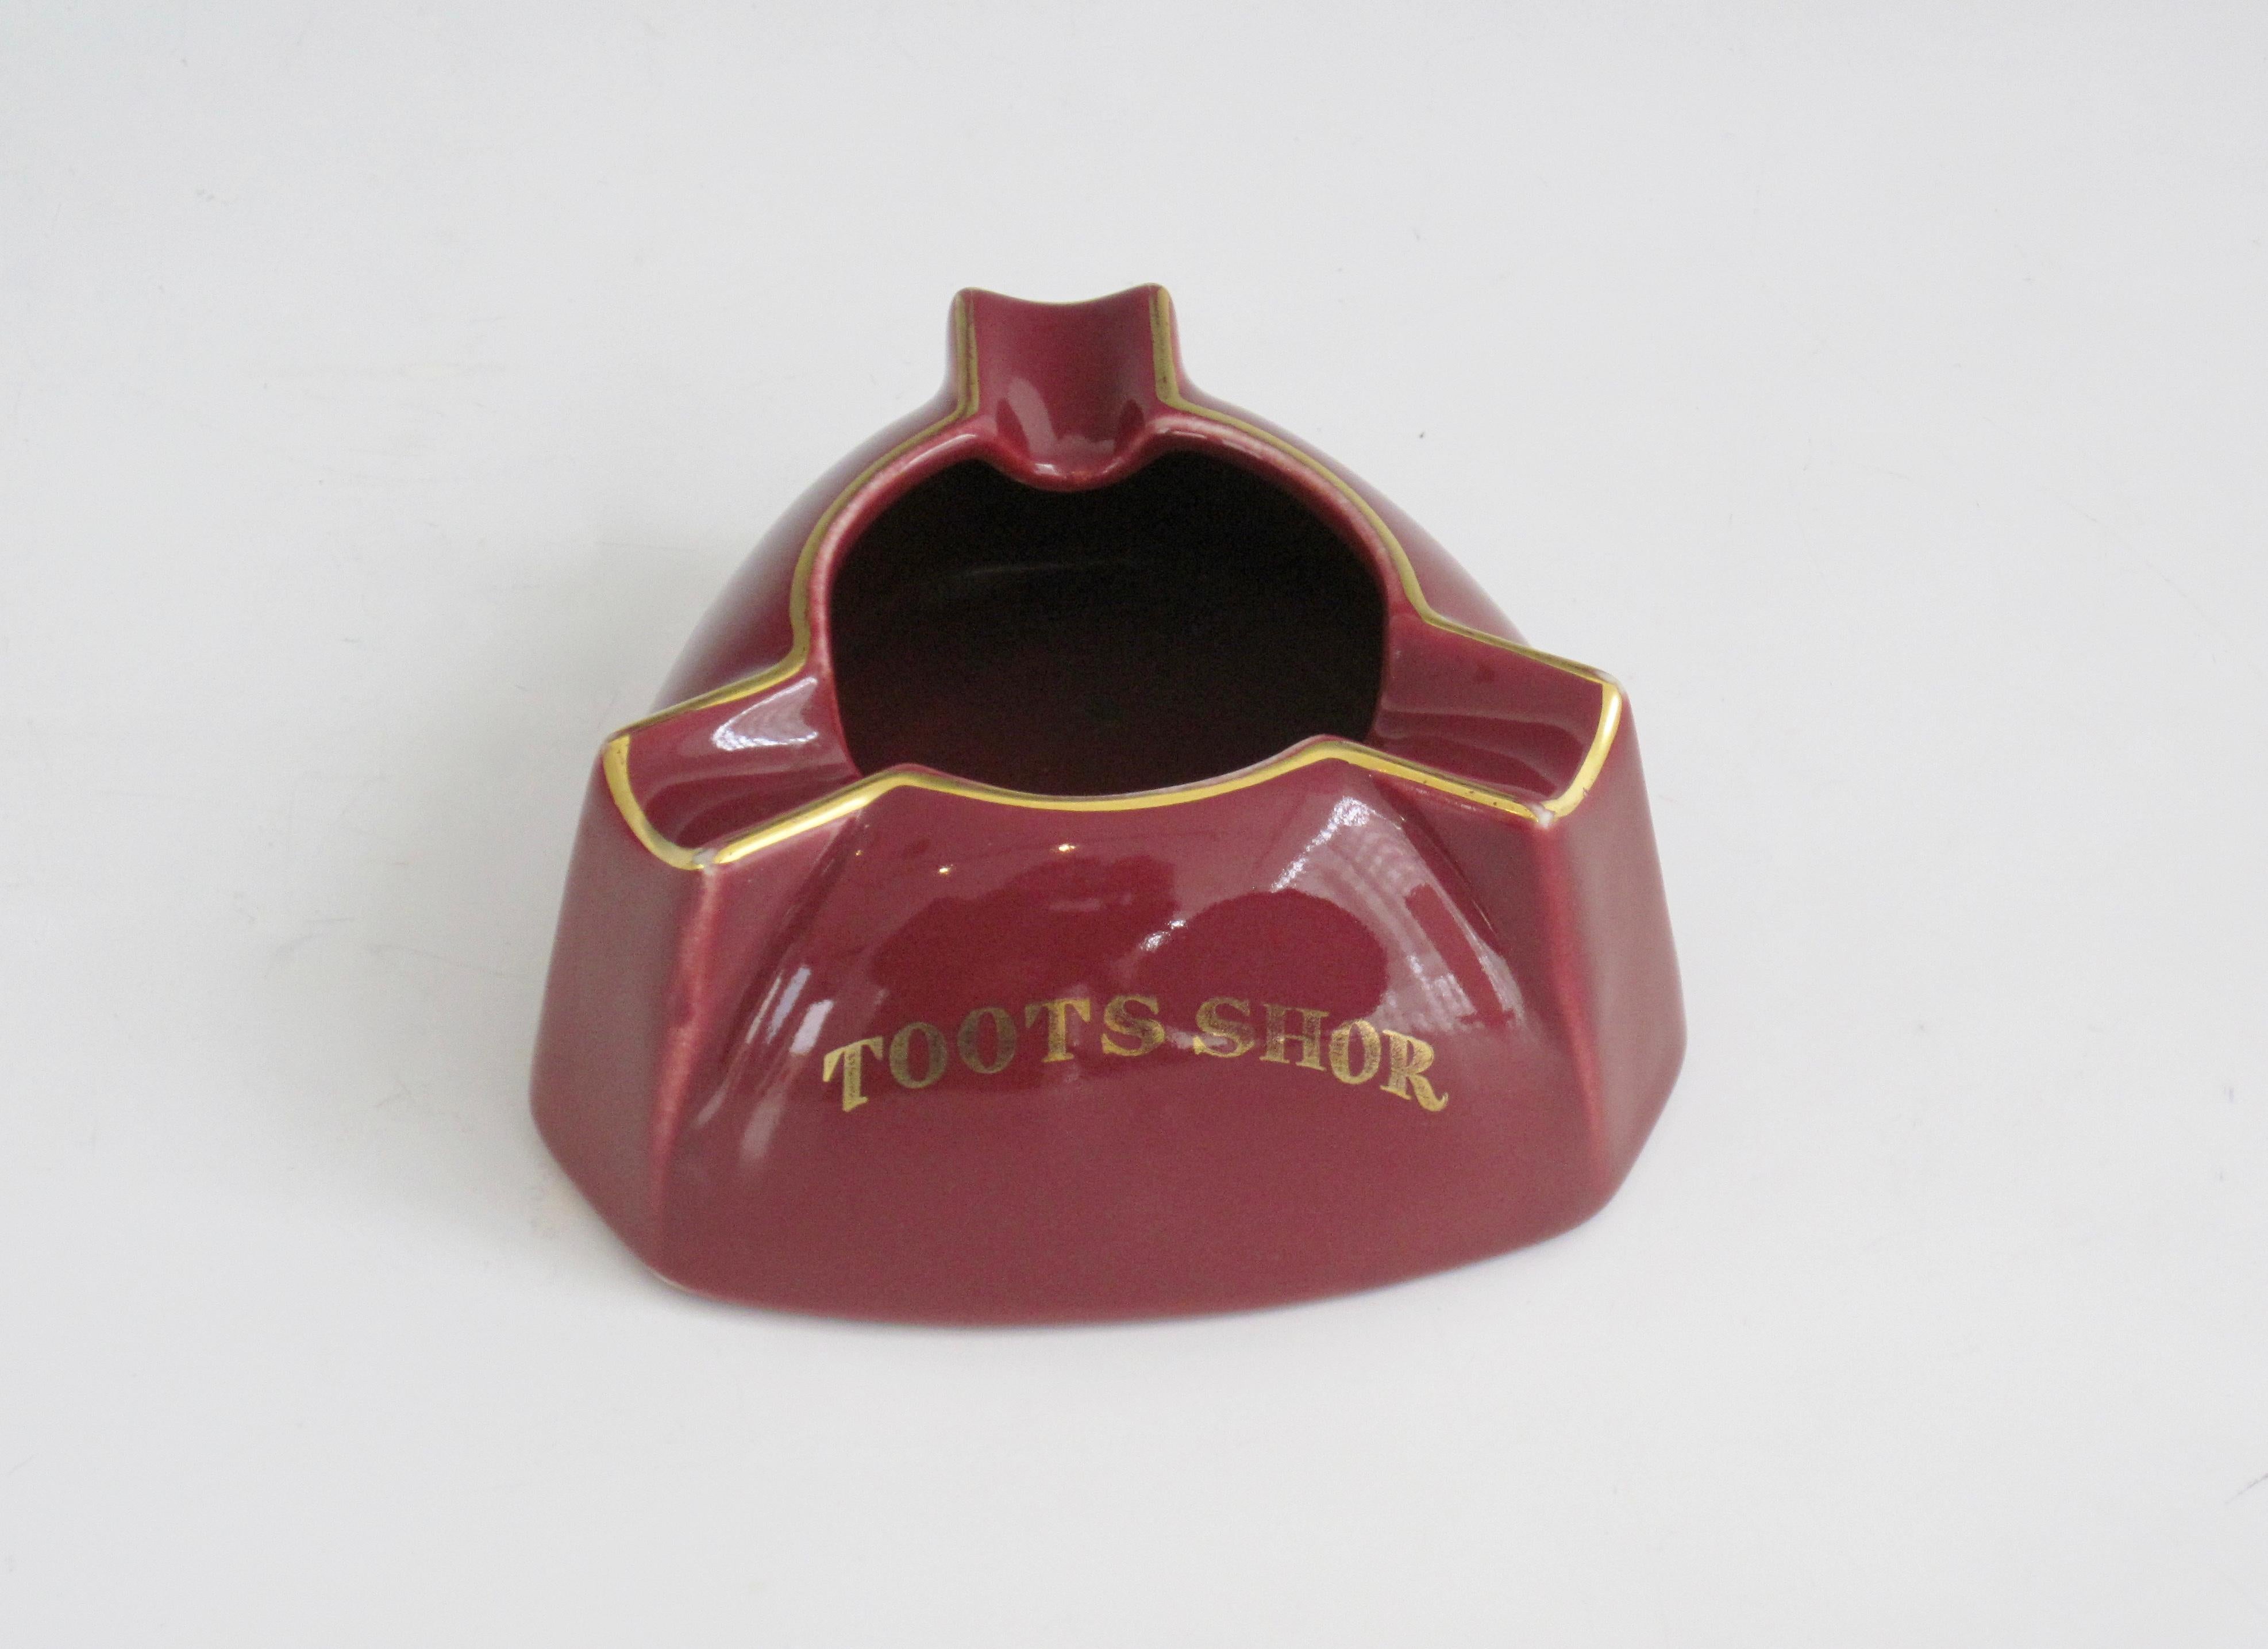 A triangular shaped maroon or burgundy and gold TOOTS SHOR ashtray from the legendary Toots Shor restaurant and lounge in NYC. c.1950 Hallmark on underside.
Toots Shor's Restaurant was a restaurant and lounge owned and operated by Bernard 